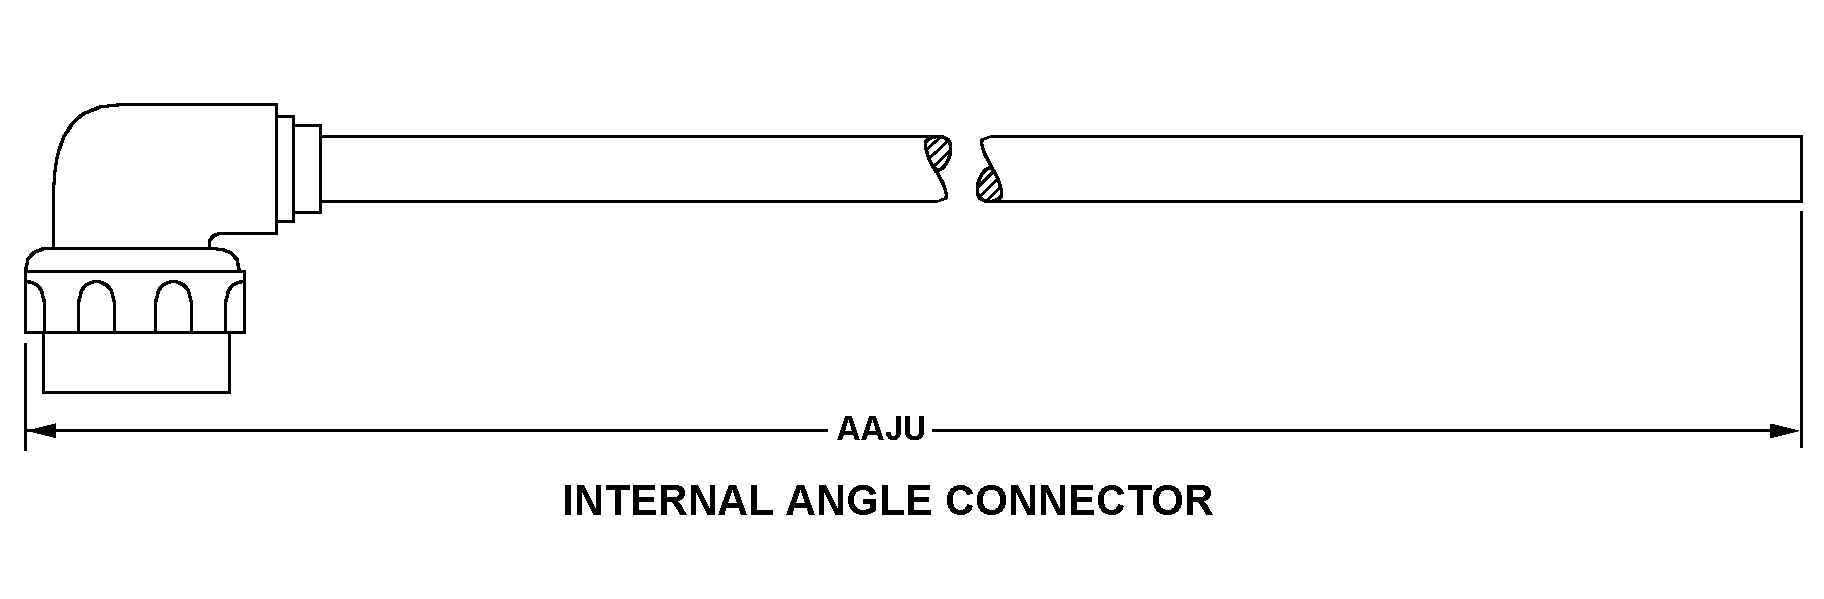 INTERNAL ANGLE CONNECTOR style nsn 5995-01-053-2979